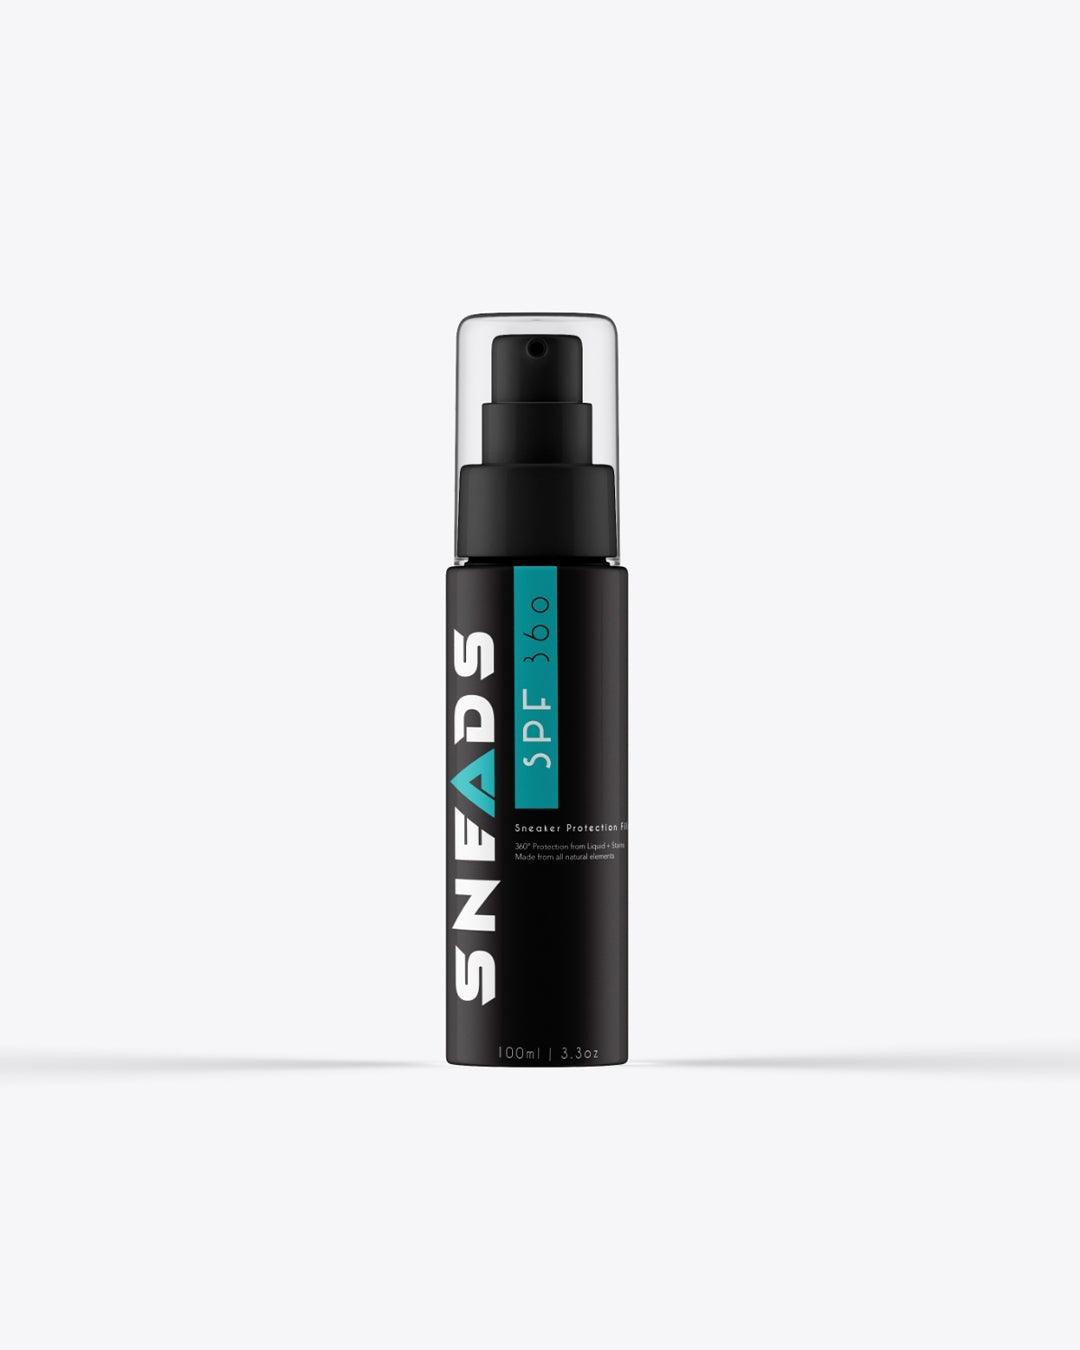 Shop Sneaker Waterproof Spray For Shoes with great discounts and